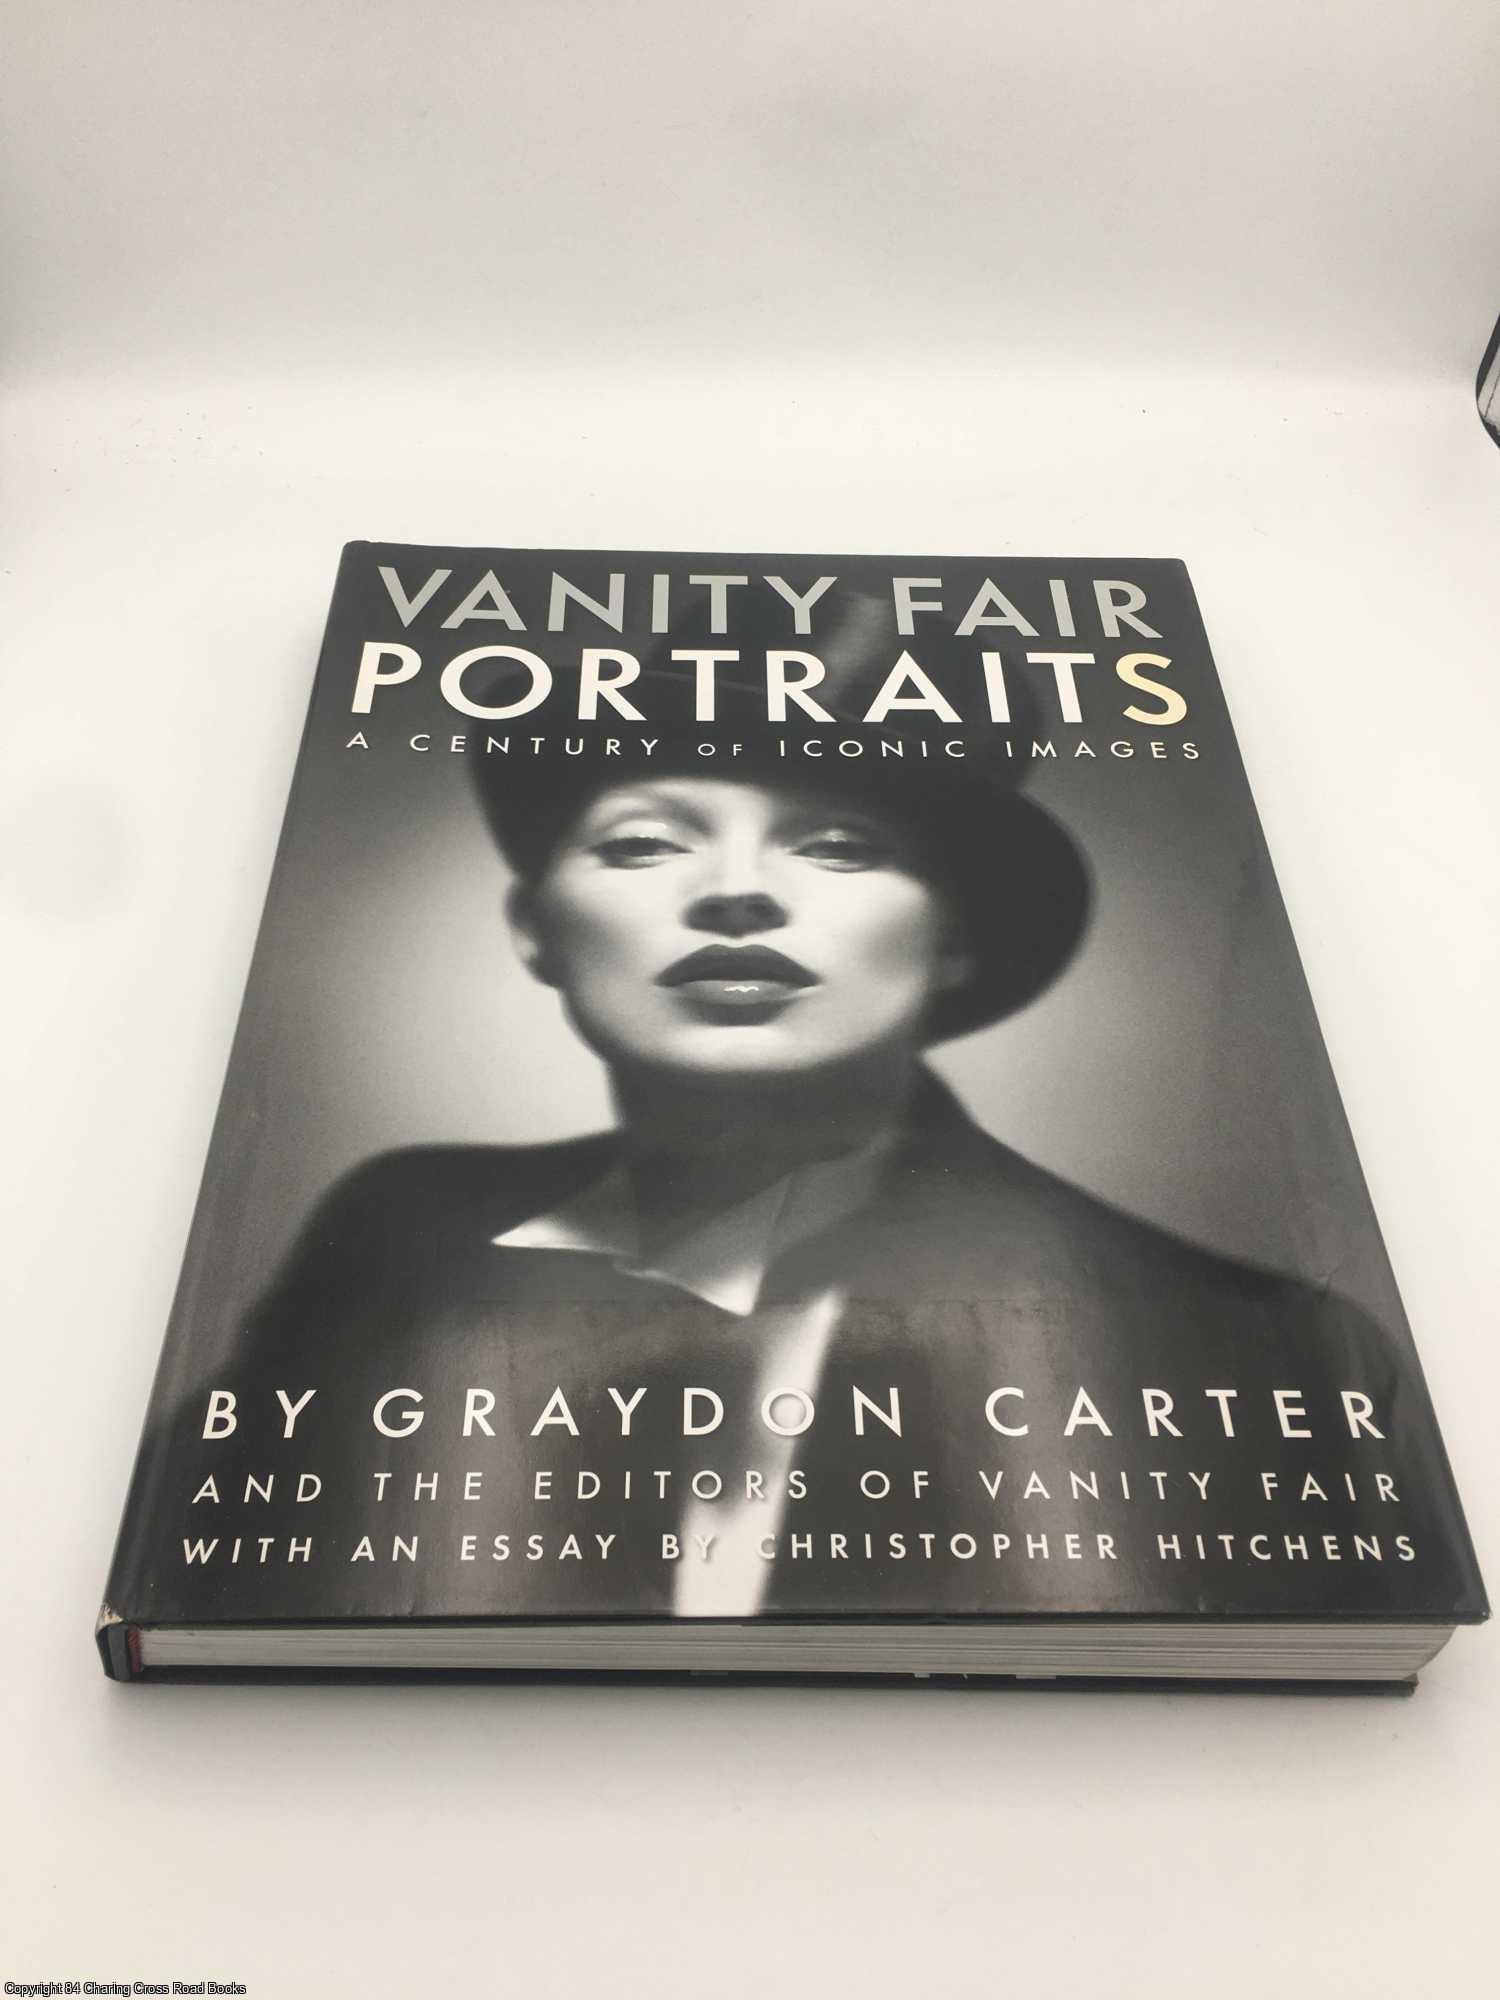 Vanity Fair Portraits: A Century of Iconic Images by Graydon Carter